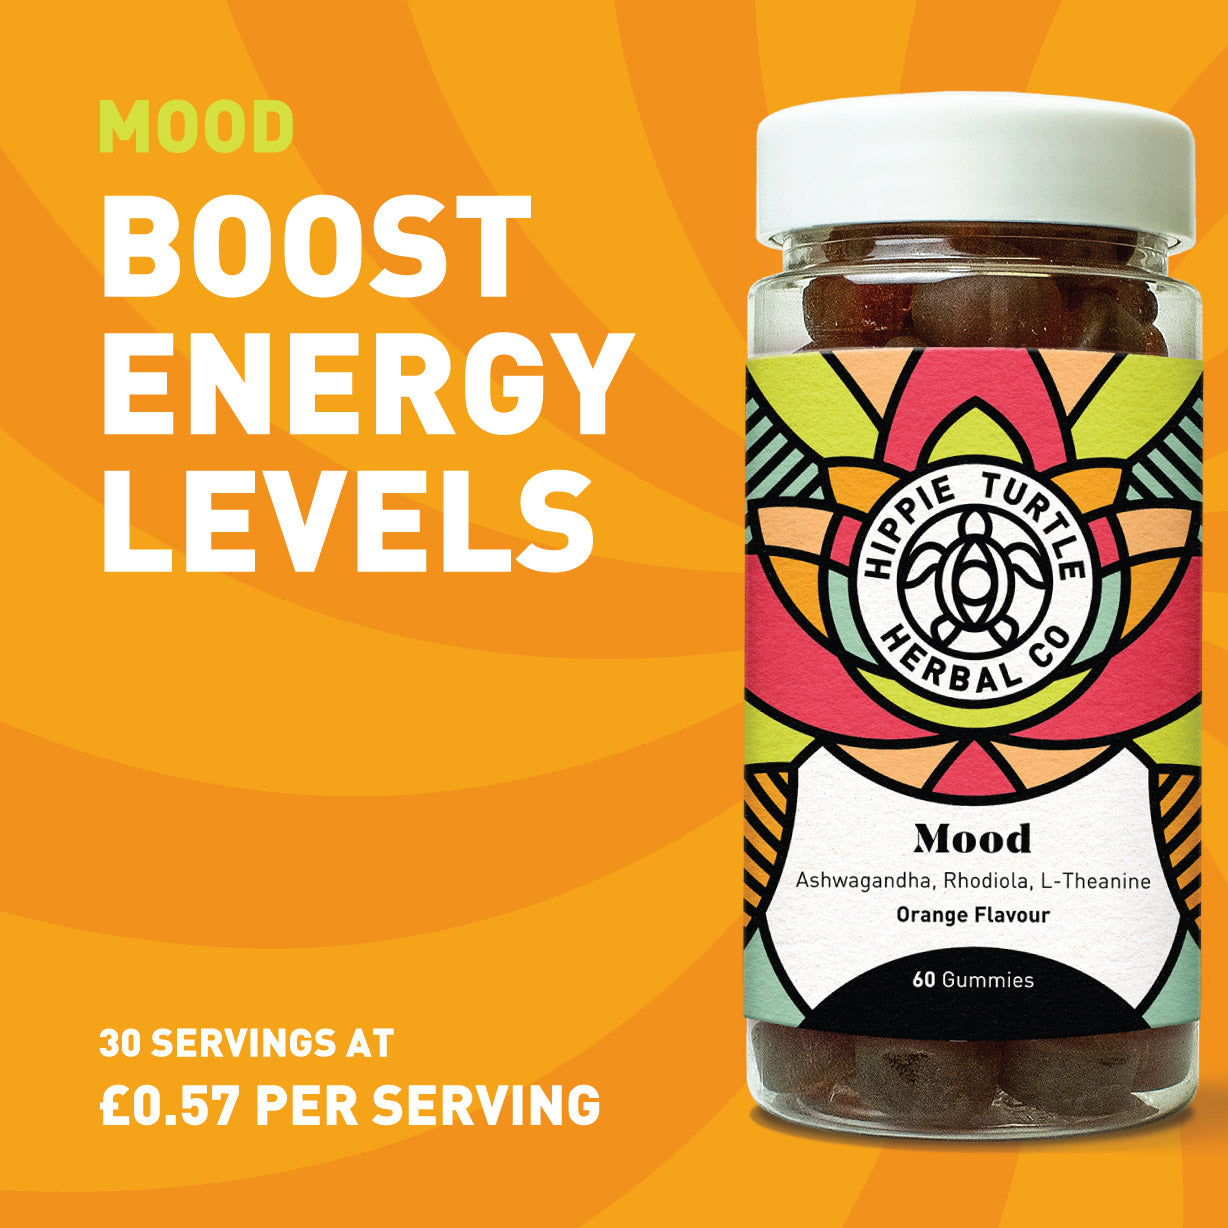 Boost energy levels with mood gummies containing B vitamins